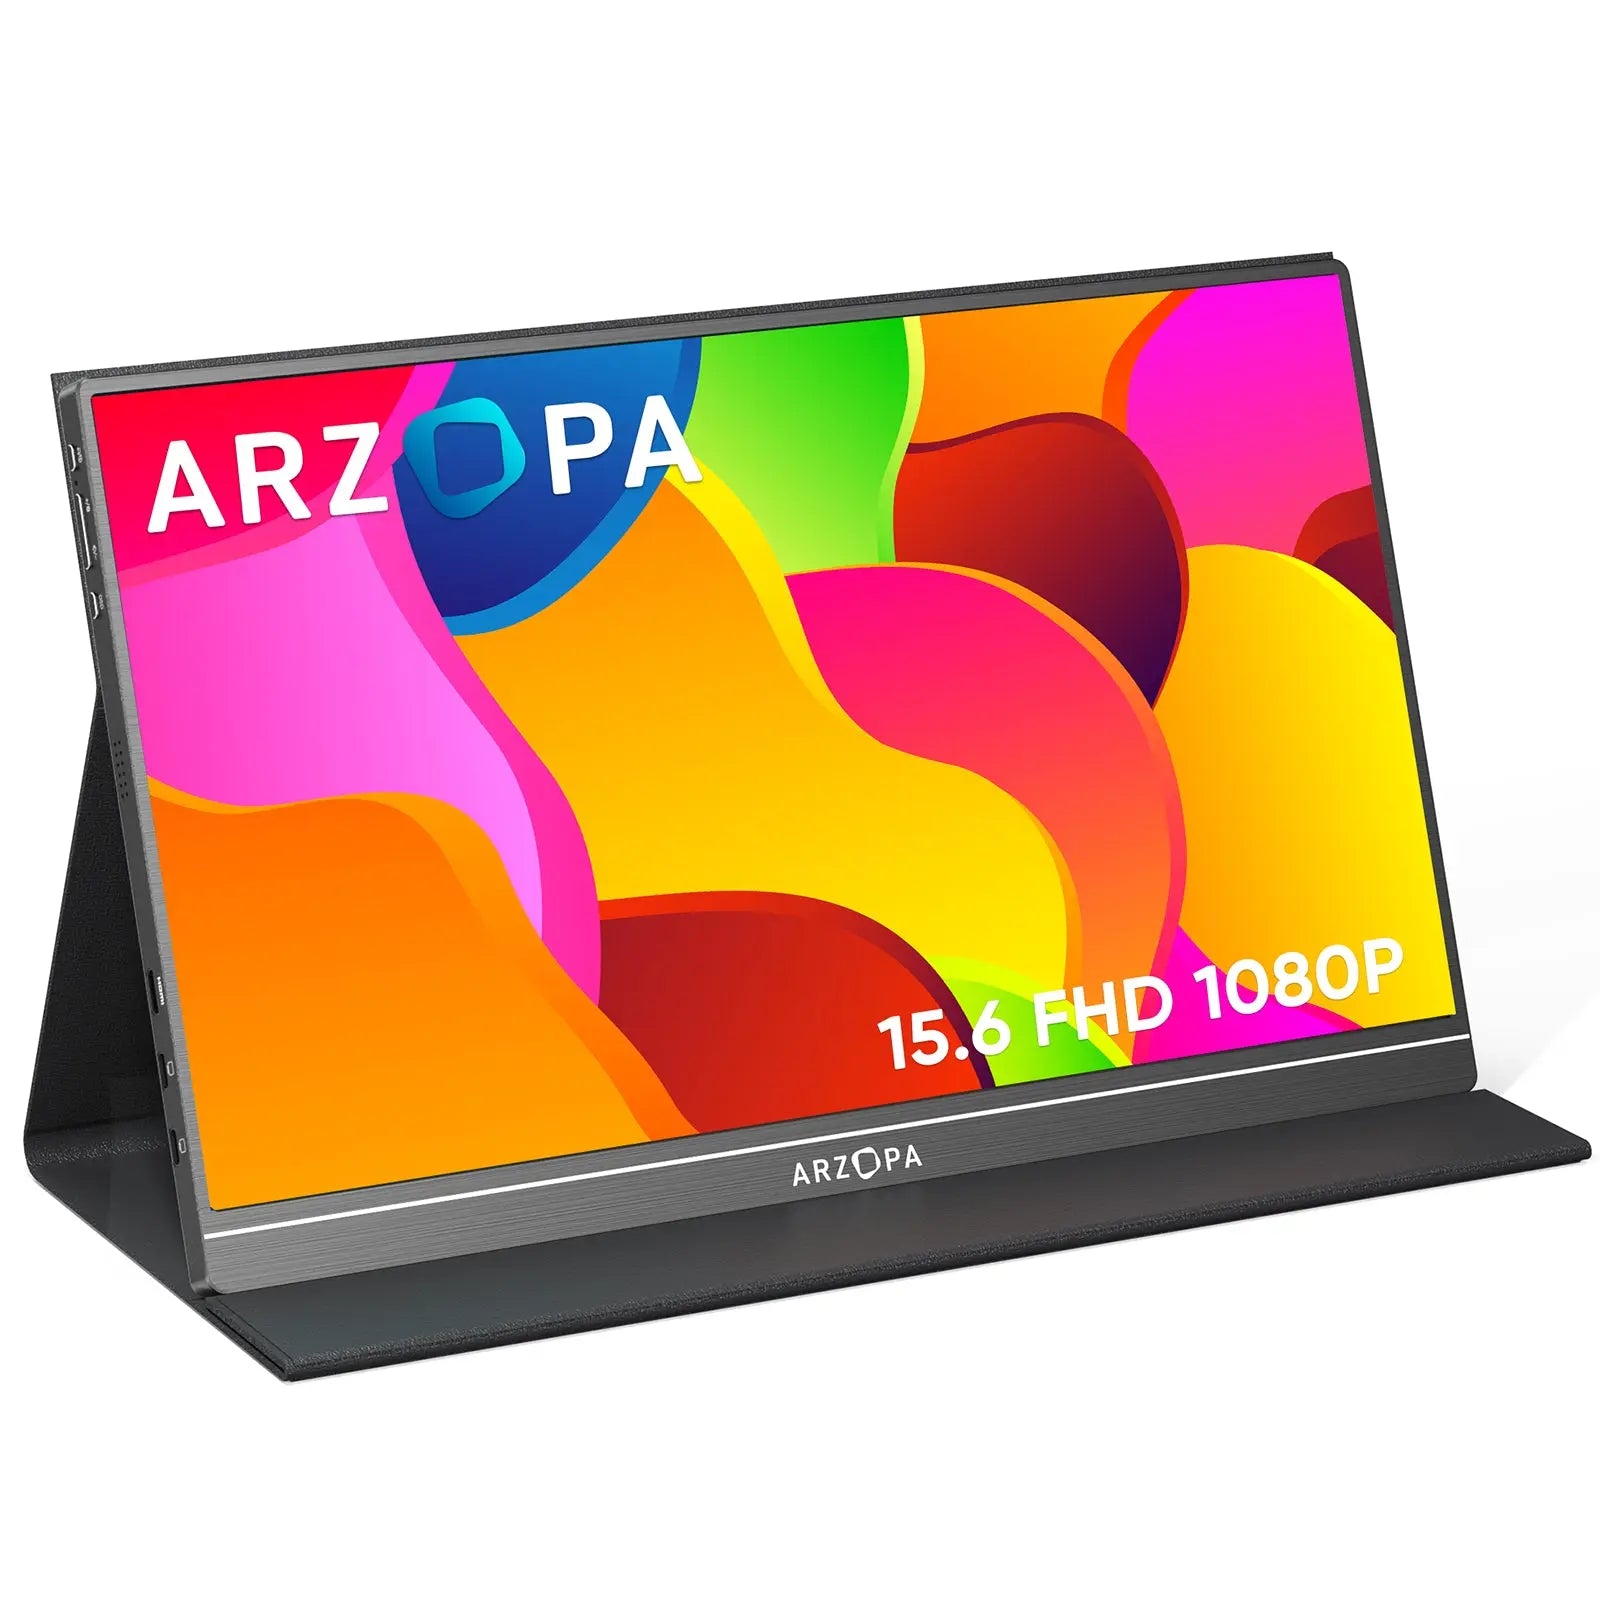 Arzopa S1 Table Black 15.6 Inch Frameless 1080P Full HD Portable